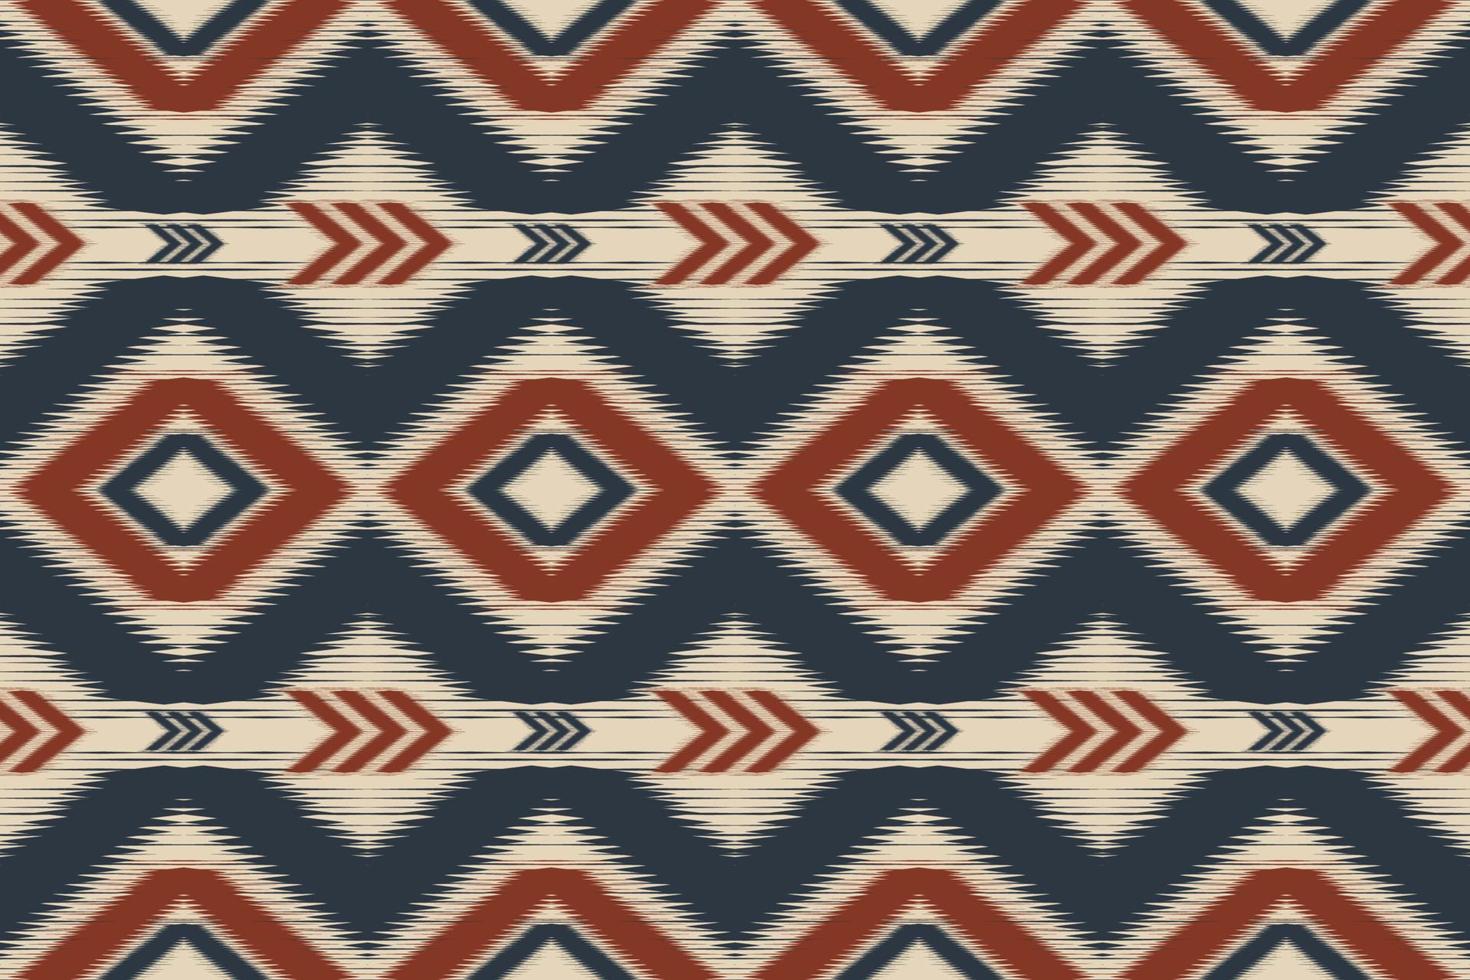 Abstract ikat seamless pattern. Geometric ethnic in tribal. Design for background, illustration, wrapping, clothing, batik, fabric, embroidery. vector